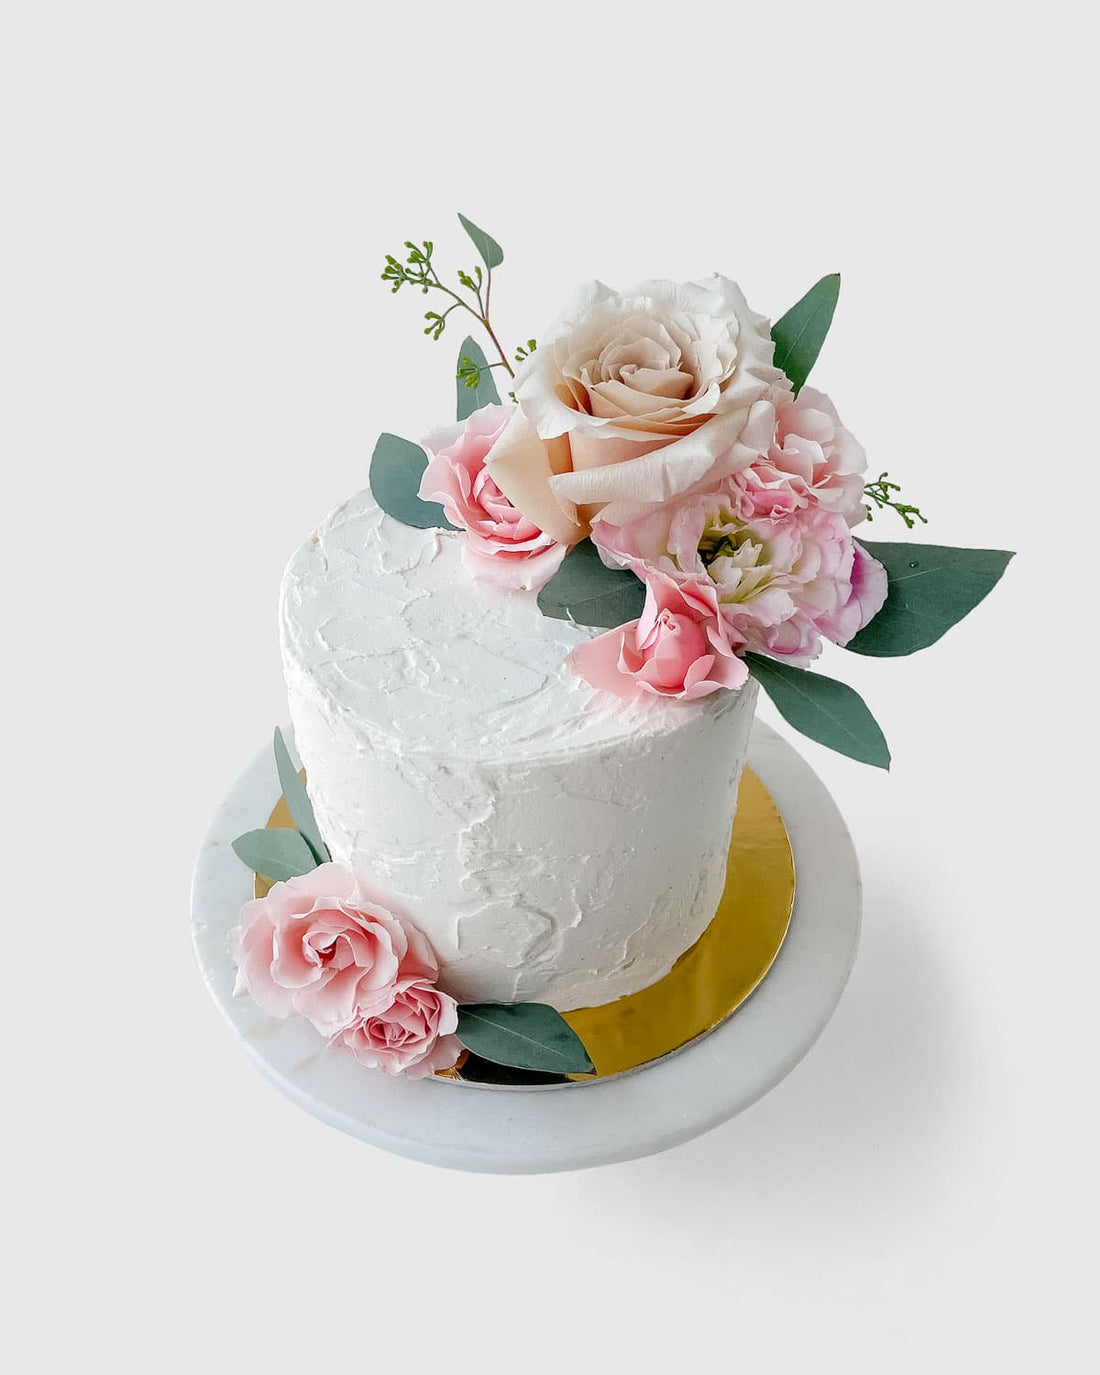 Bright Festive White Cake With Bright Flowers Made Of Cream A Wedding Cake  For A Woman Stock Photo - Download Image Now - iStock